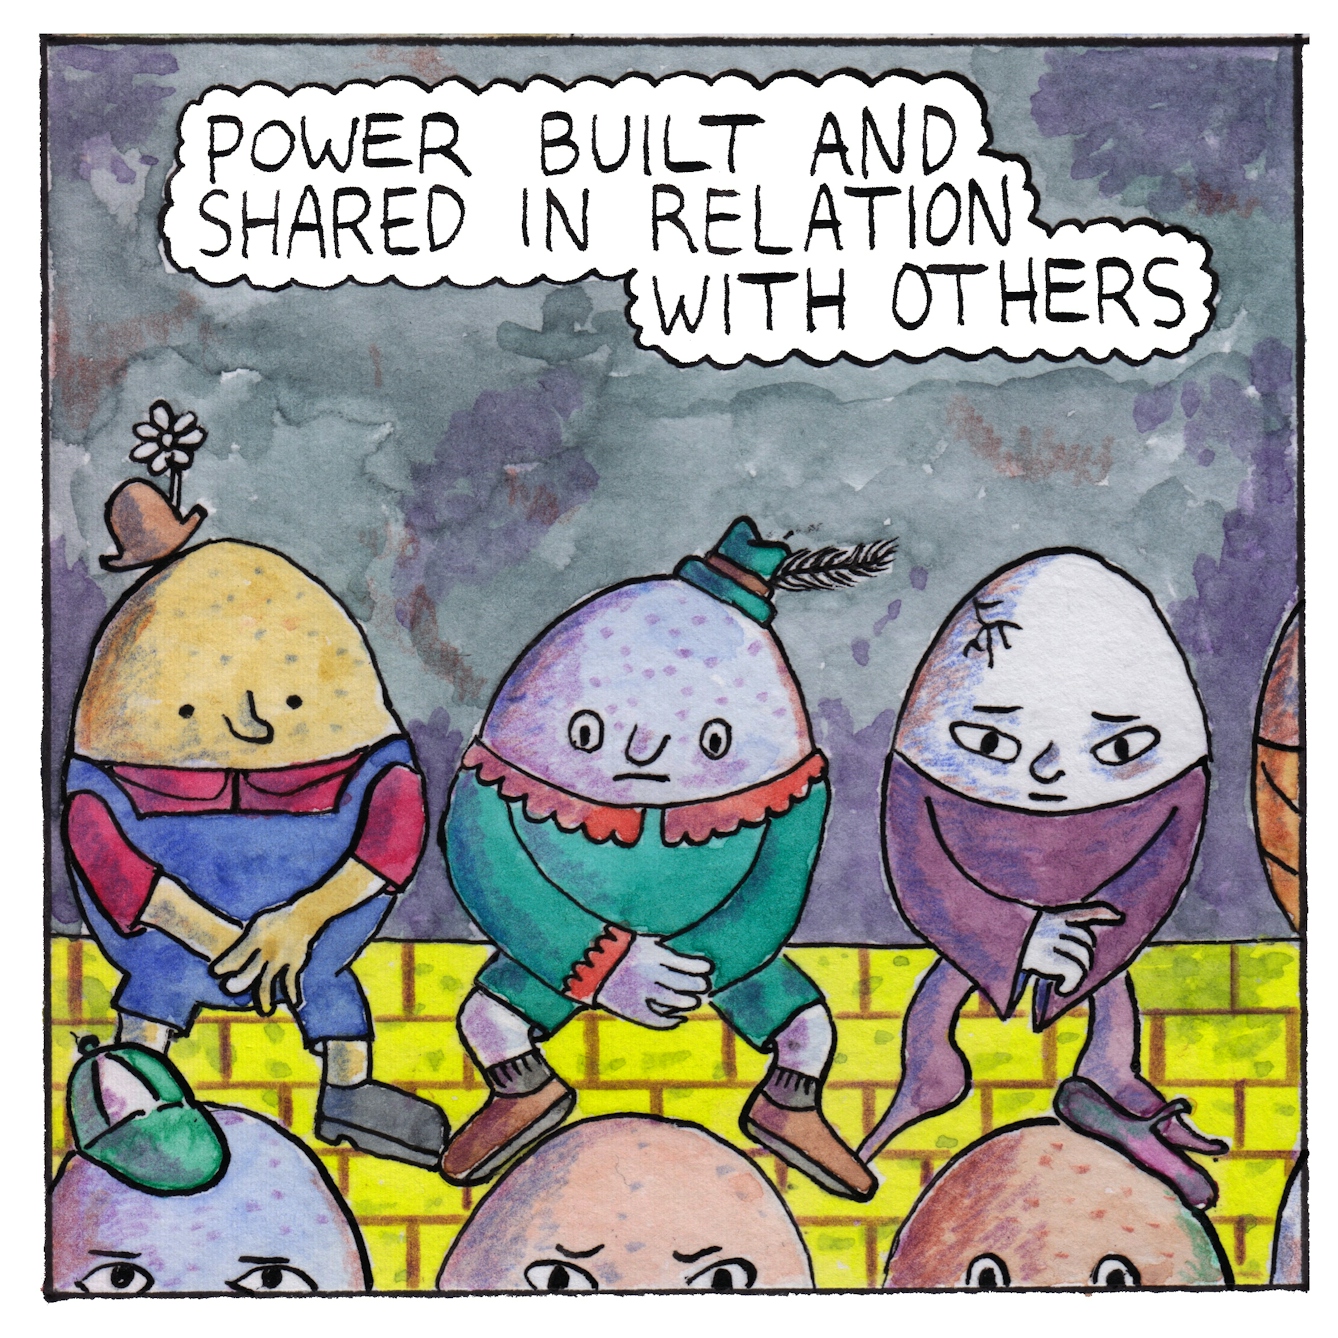 Panel 9 of the comic 'Egg Inc': Three egg-shaped characters in pantomime style costumes, tow with hats, one with a crack in it's head, all sit in a row on a yellow brick wall. Their feet just touch the heads of three more egg-shaped characters immediately below them and peering up over the bottom edge of the panel. The text bubble at the top of the panel says "Power built and shared in relation with others."